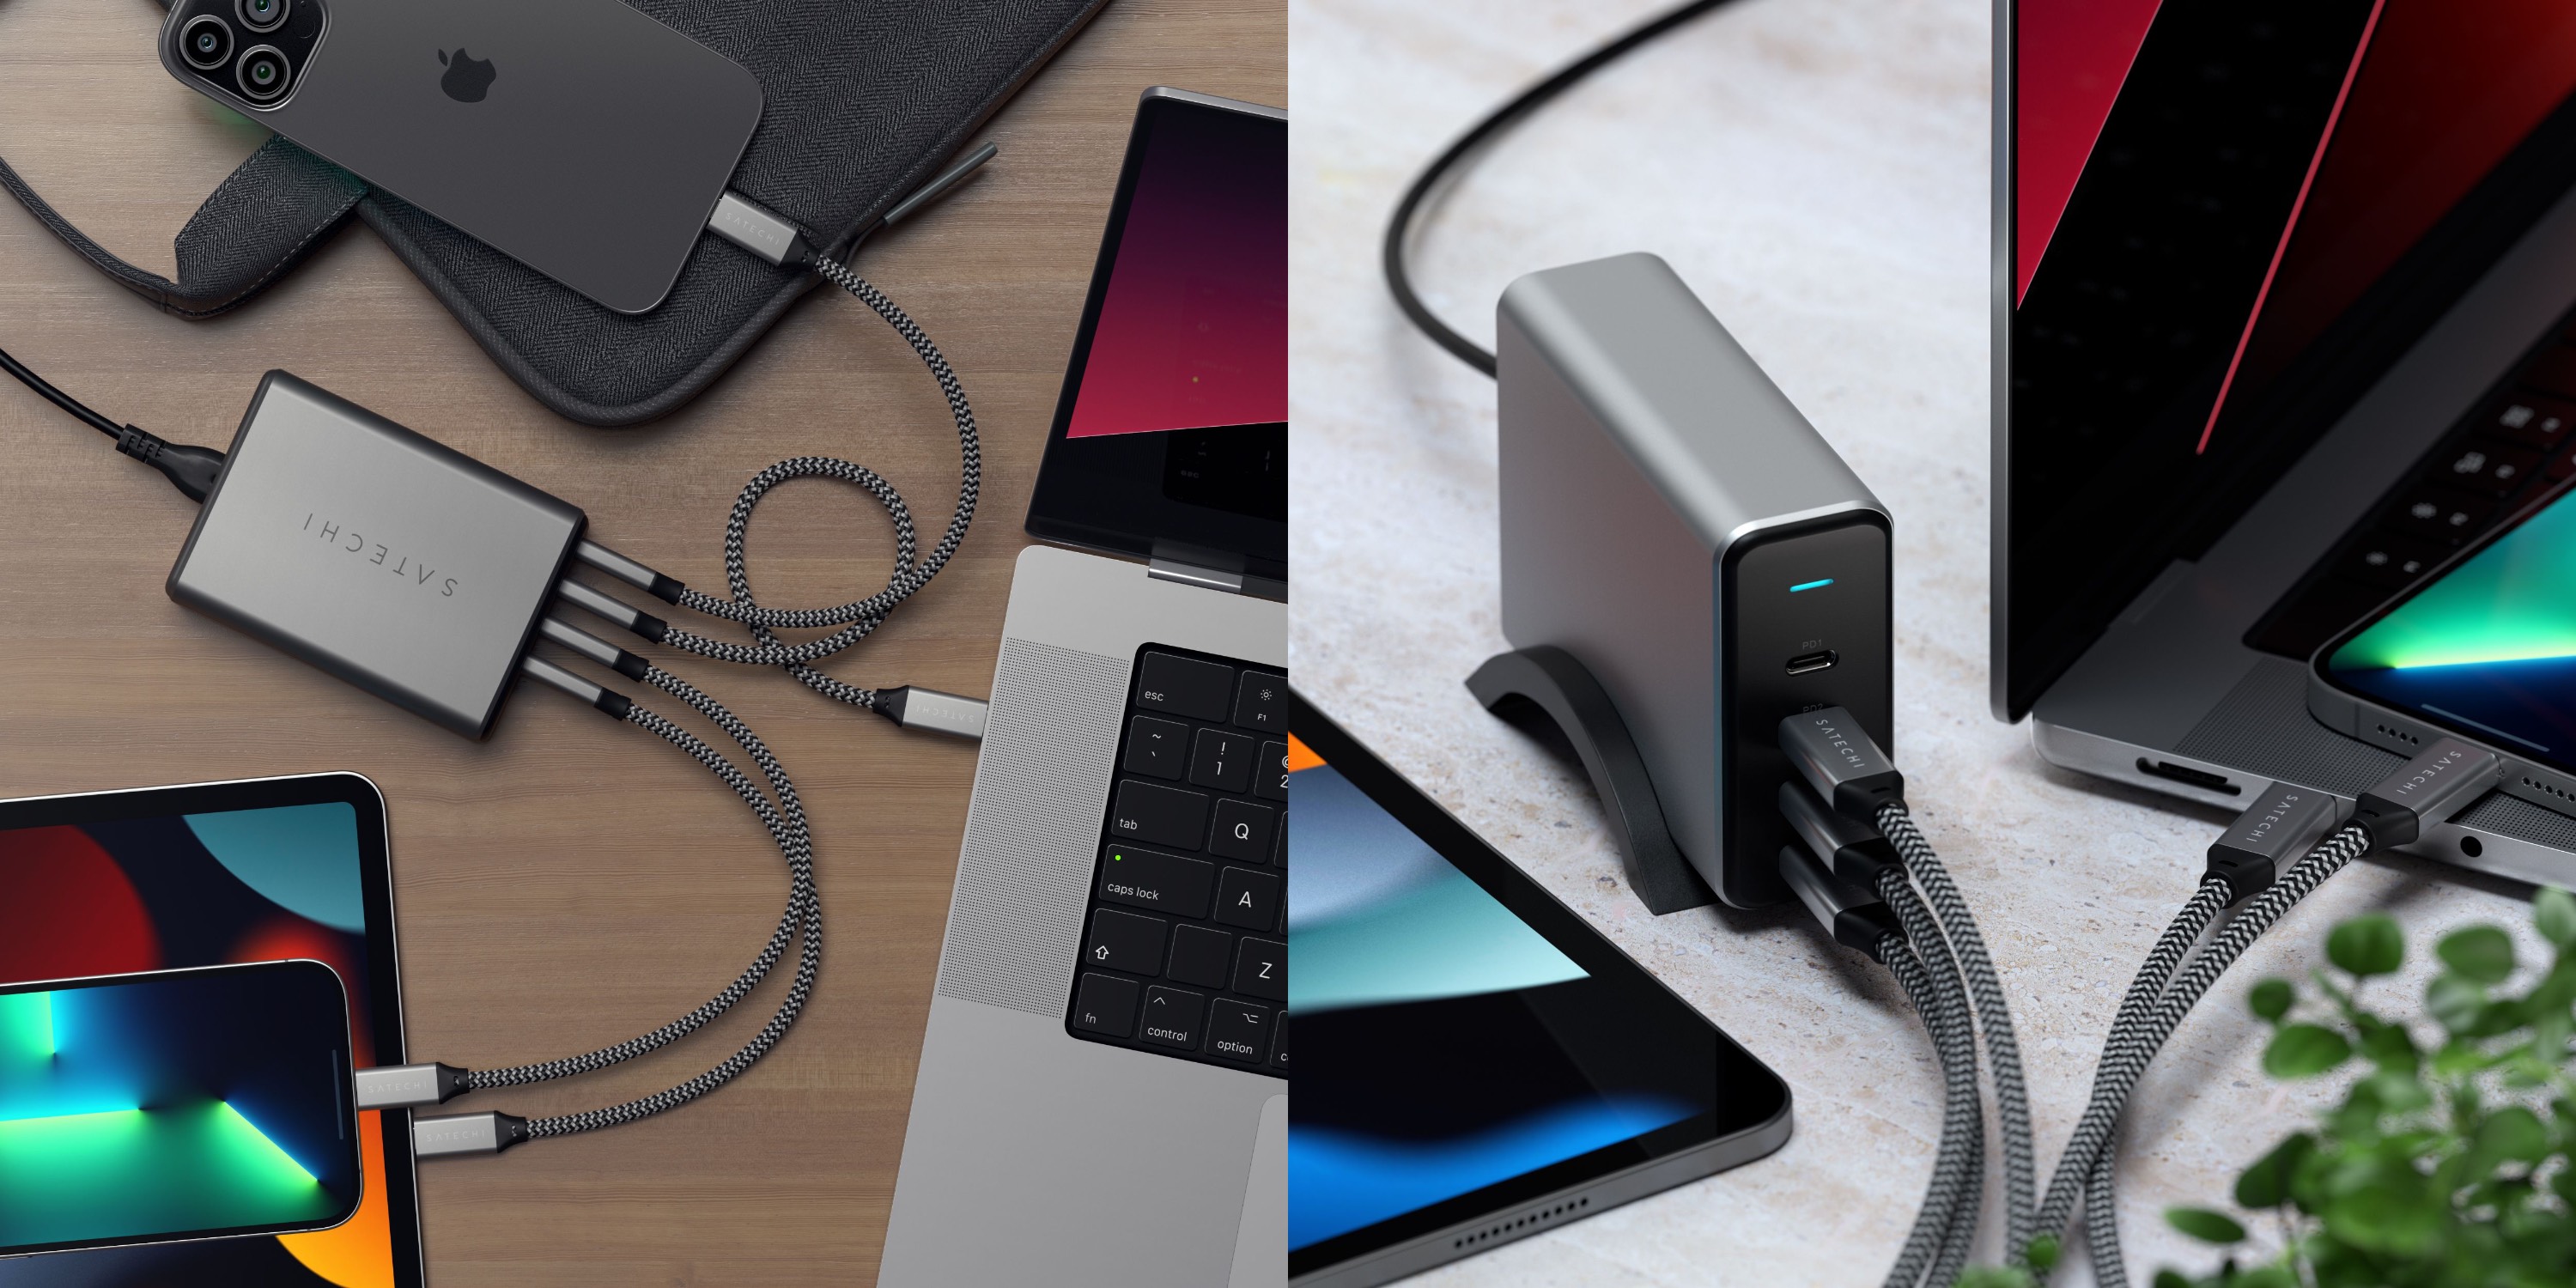 Satechi's 165W USB-C 4-Port GaN Charger arrives at CES - 9to5Mac